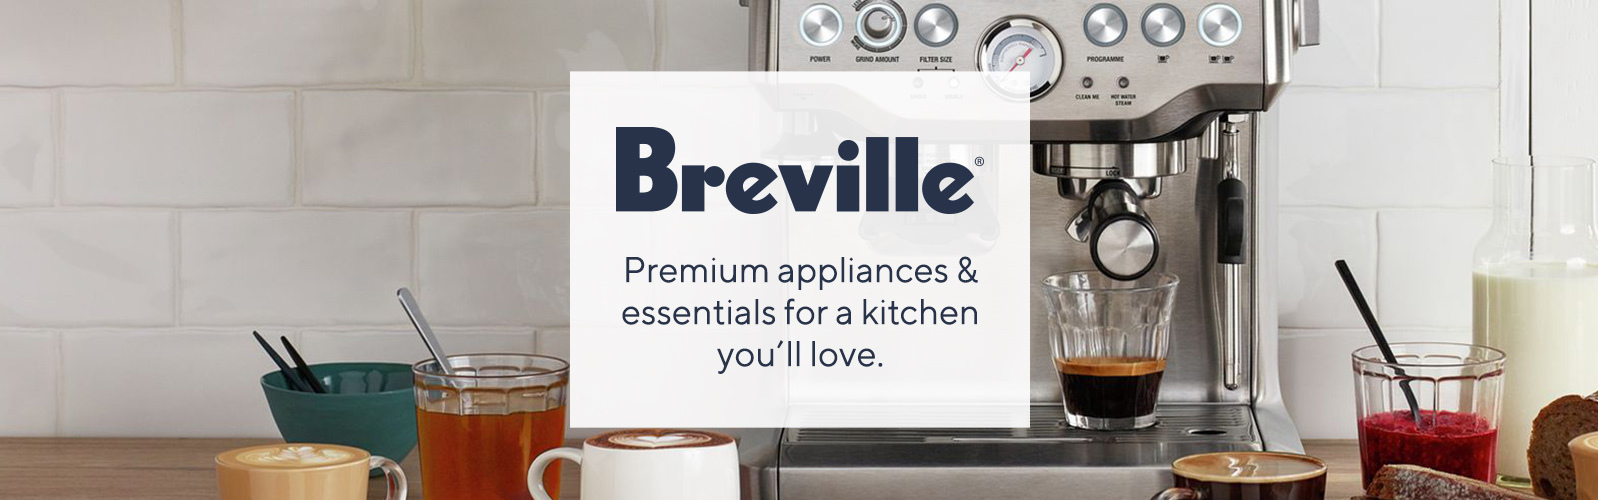 About Breville Company Overview